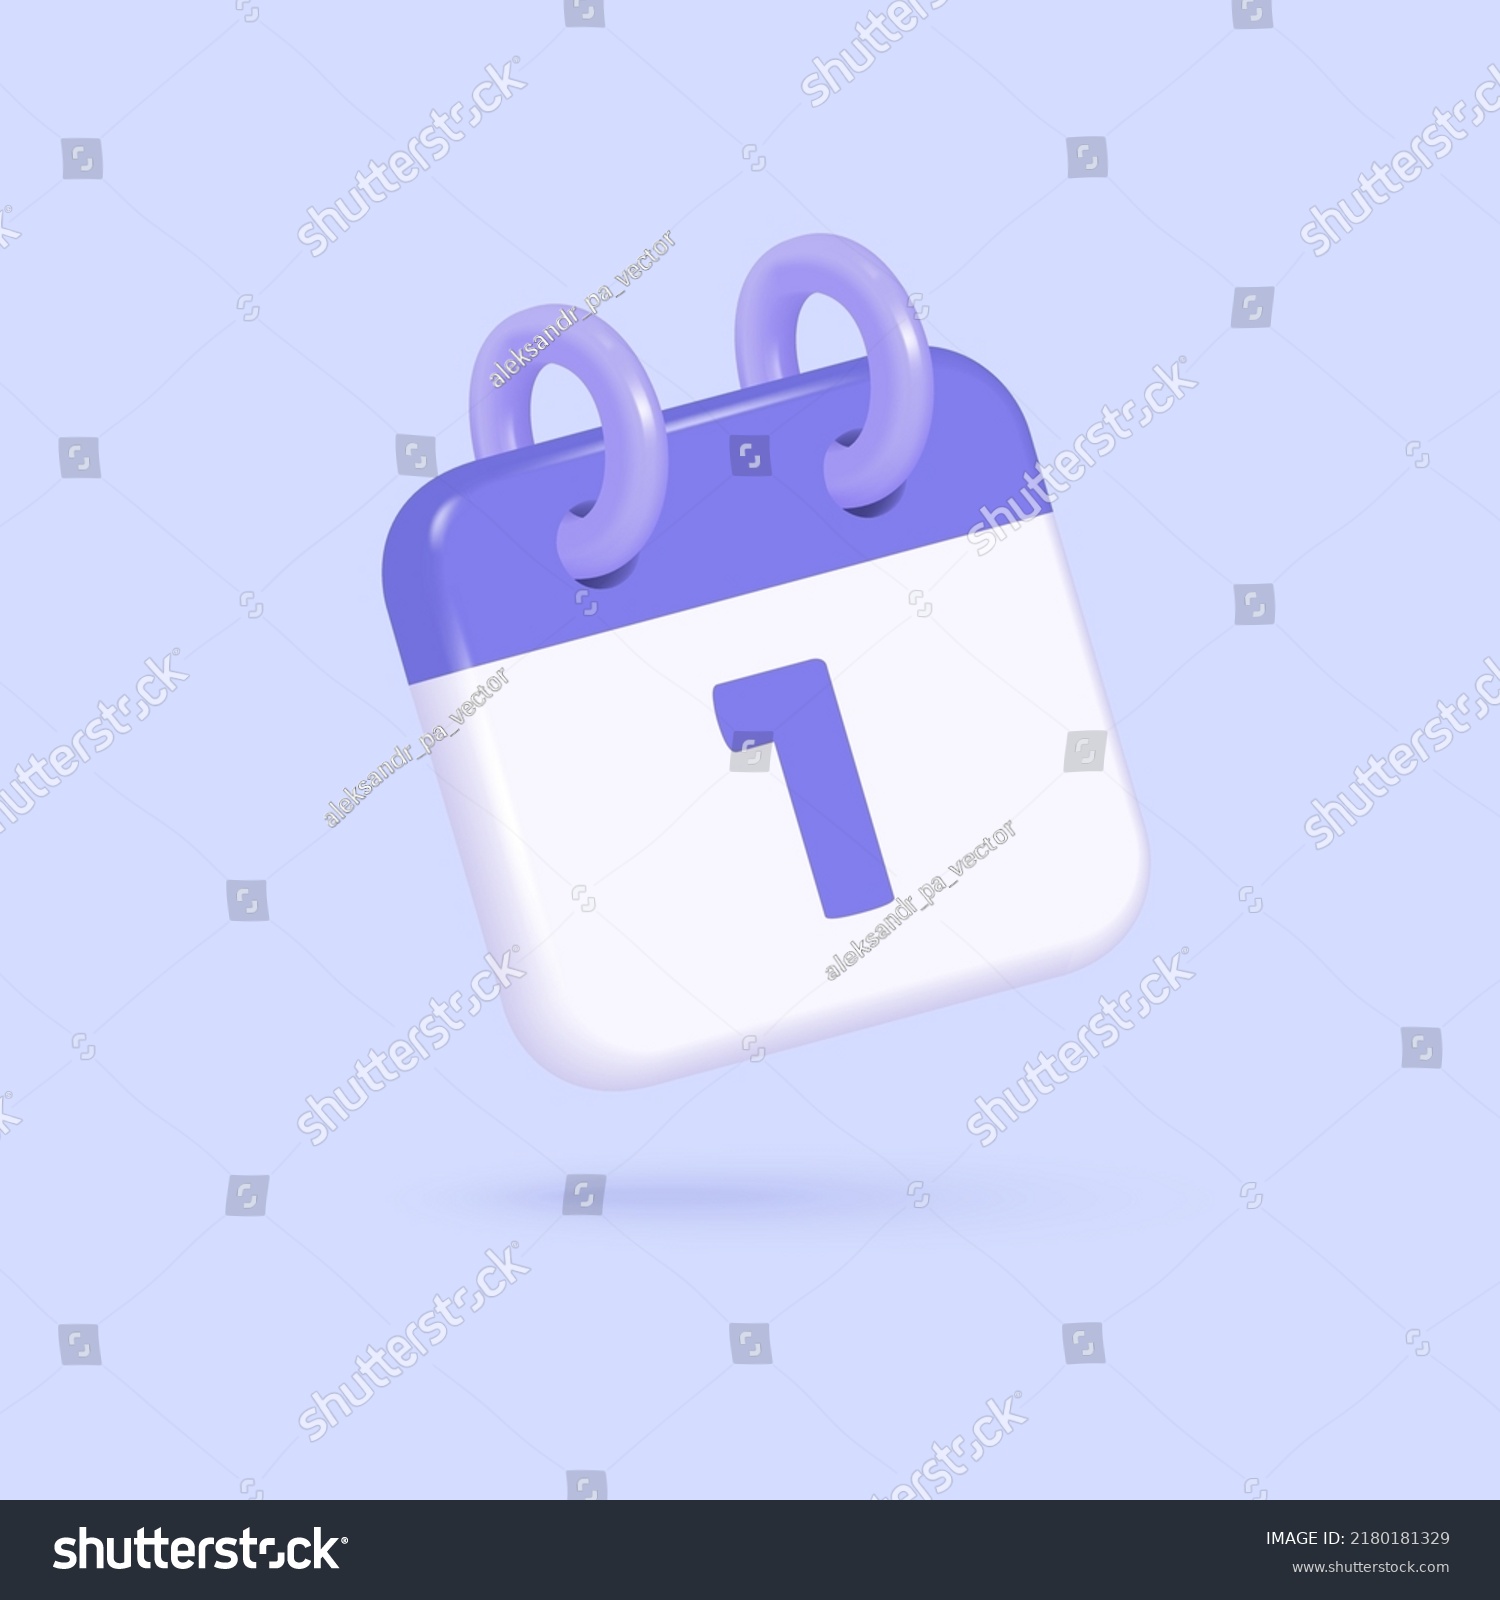 SVG of 3d calendar icon in realistic style. cute, shiny calendar. vector illustration isolated on purple background. svg